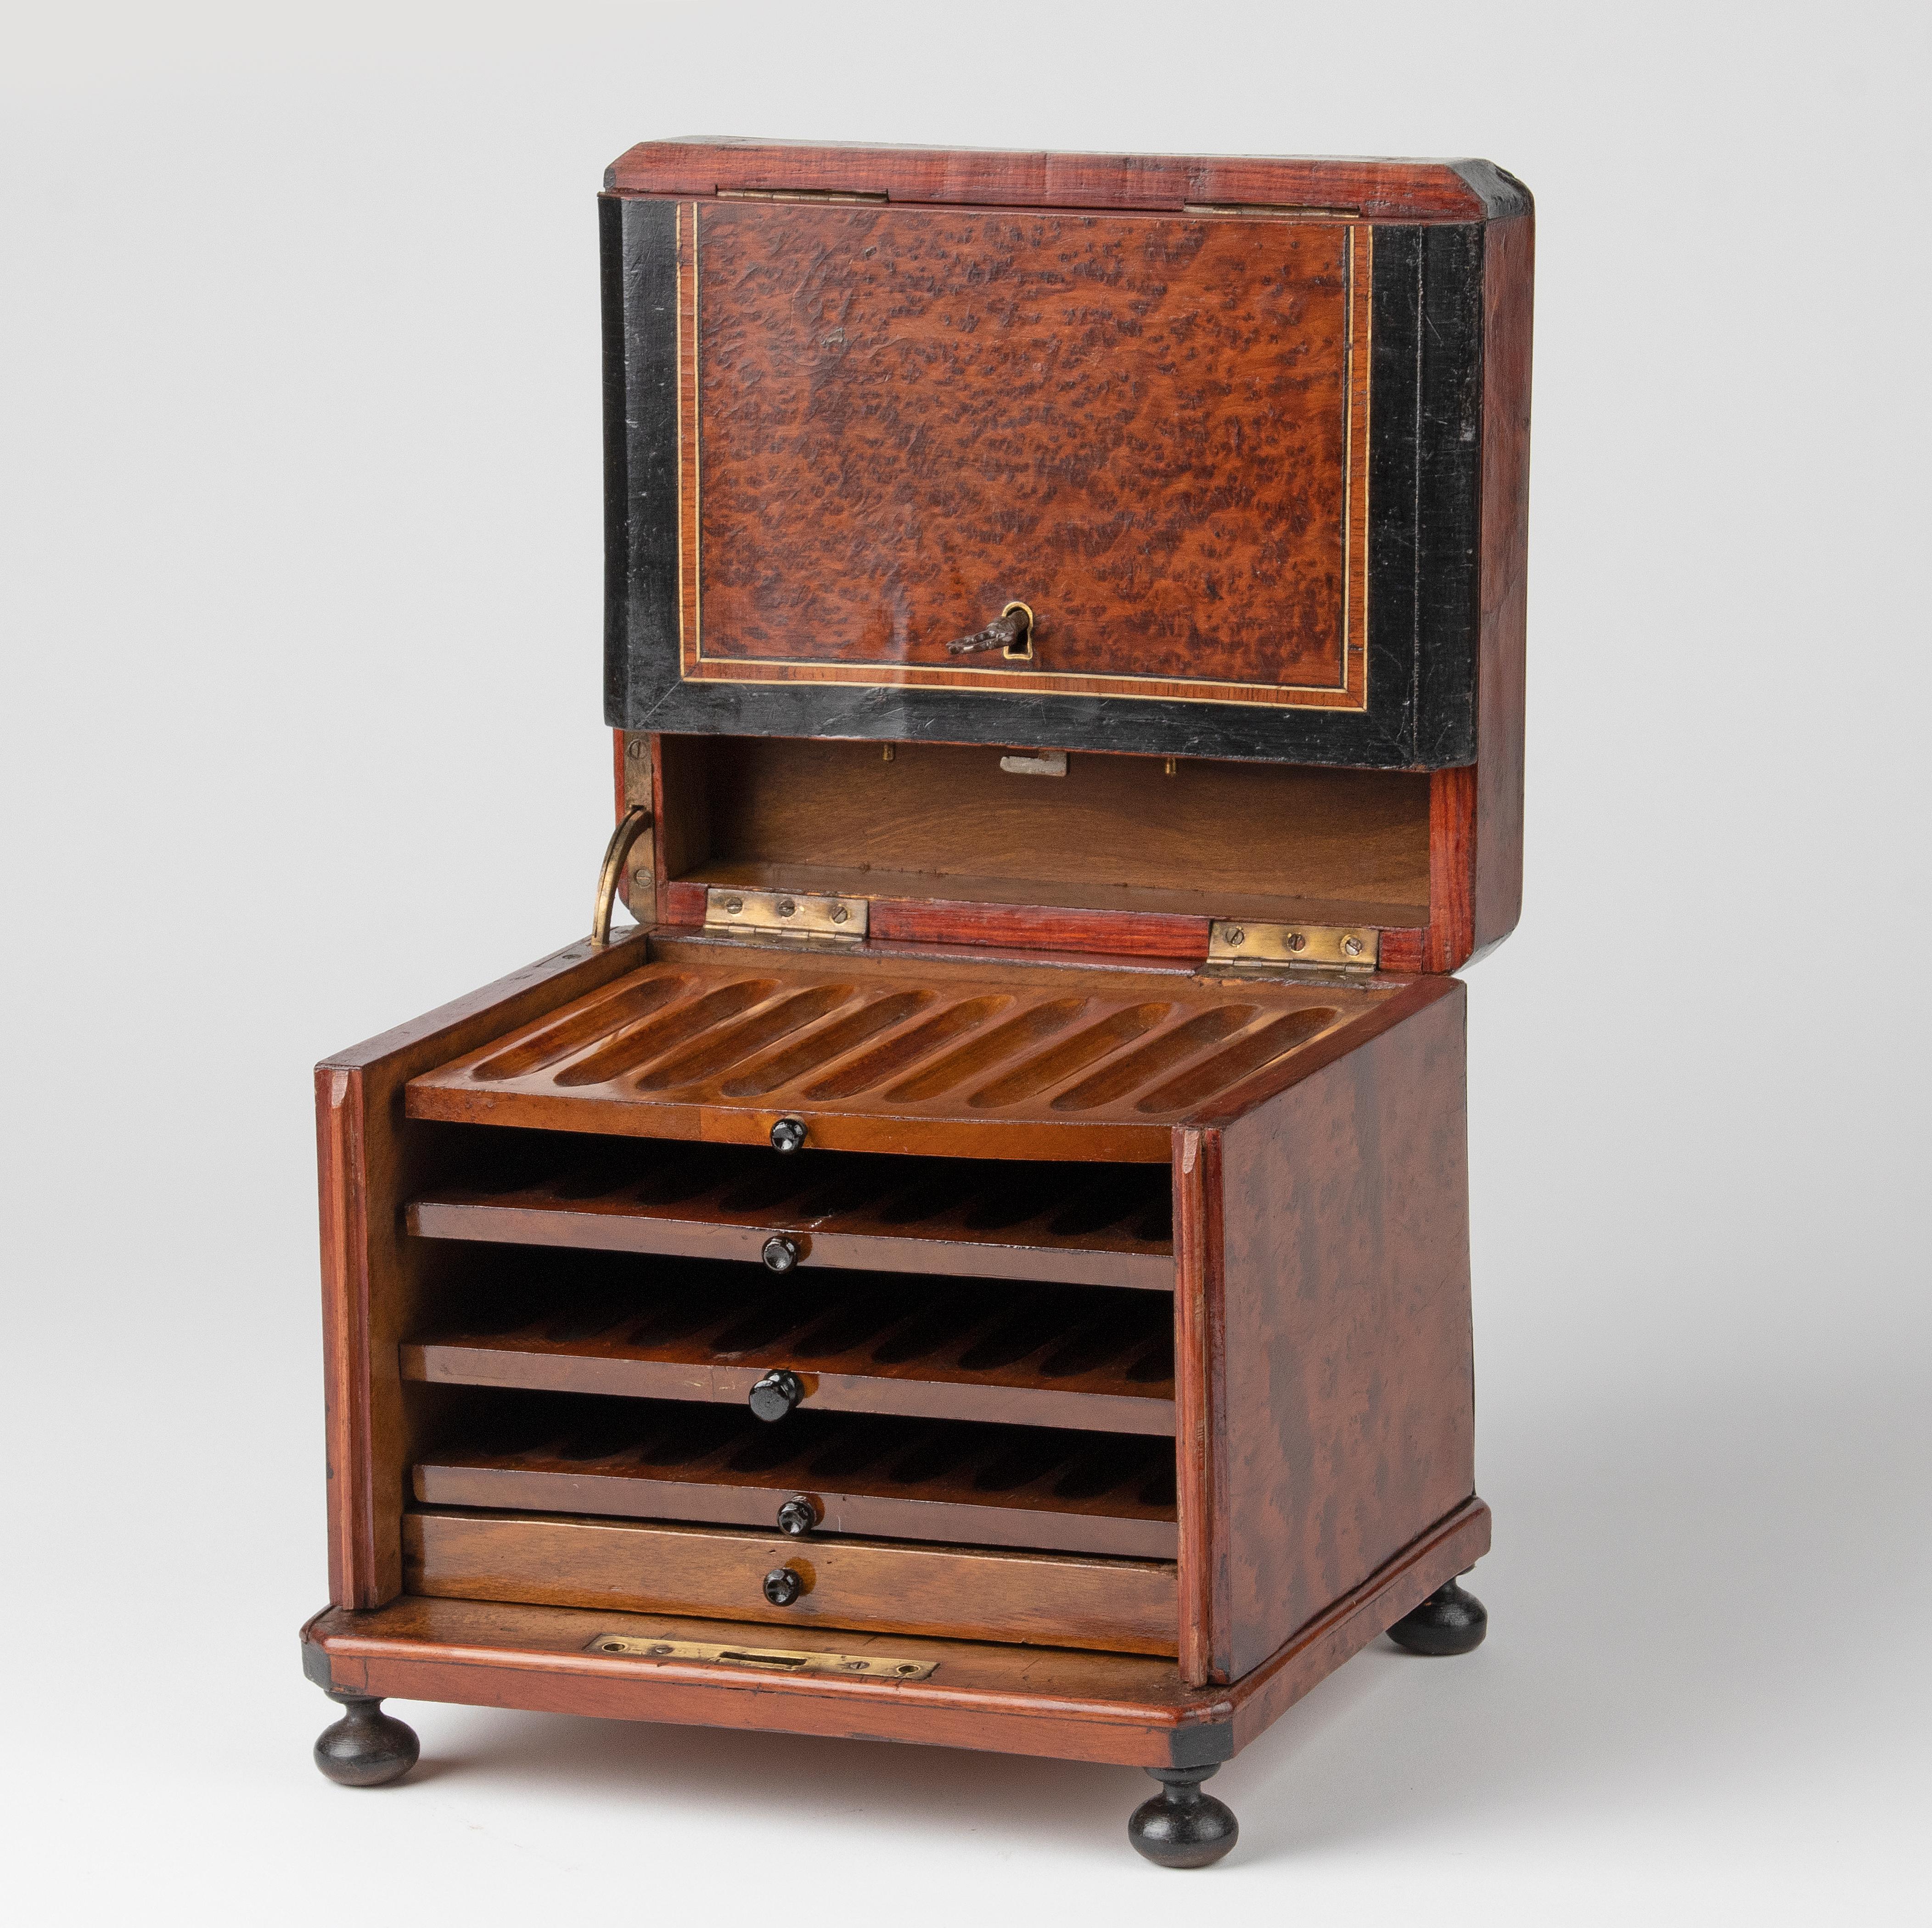 Antique cigar chest with room for 36 cigars. The chest is veneered with various kinds of wood, mostly burl walnut. On top a brass inlay. The interior has four drawers for cigars, made of mahogany, and 1 extra drawer for accessories. With working